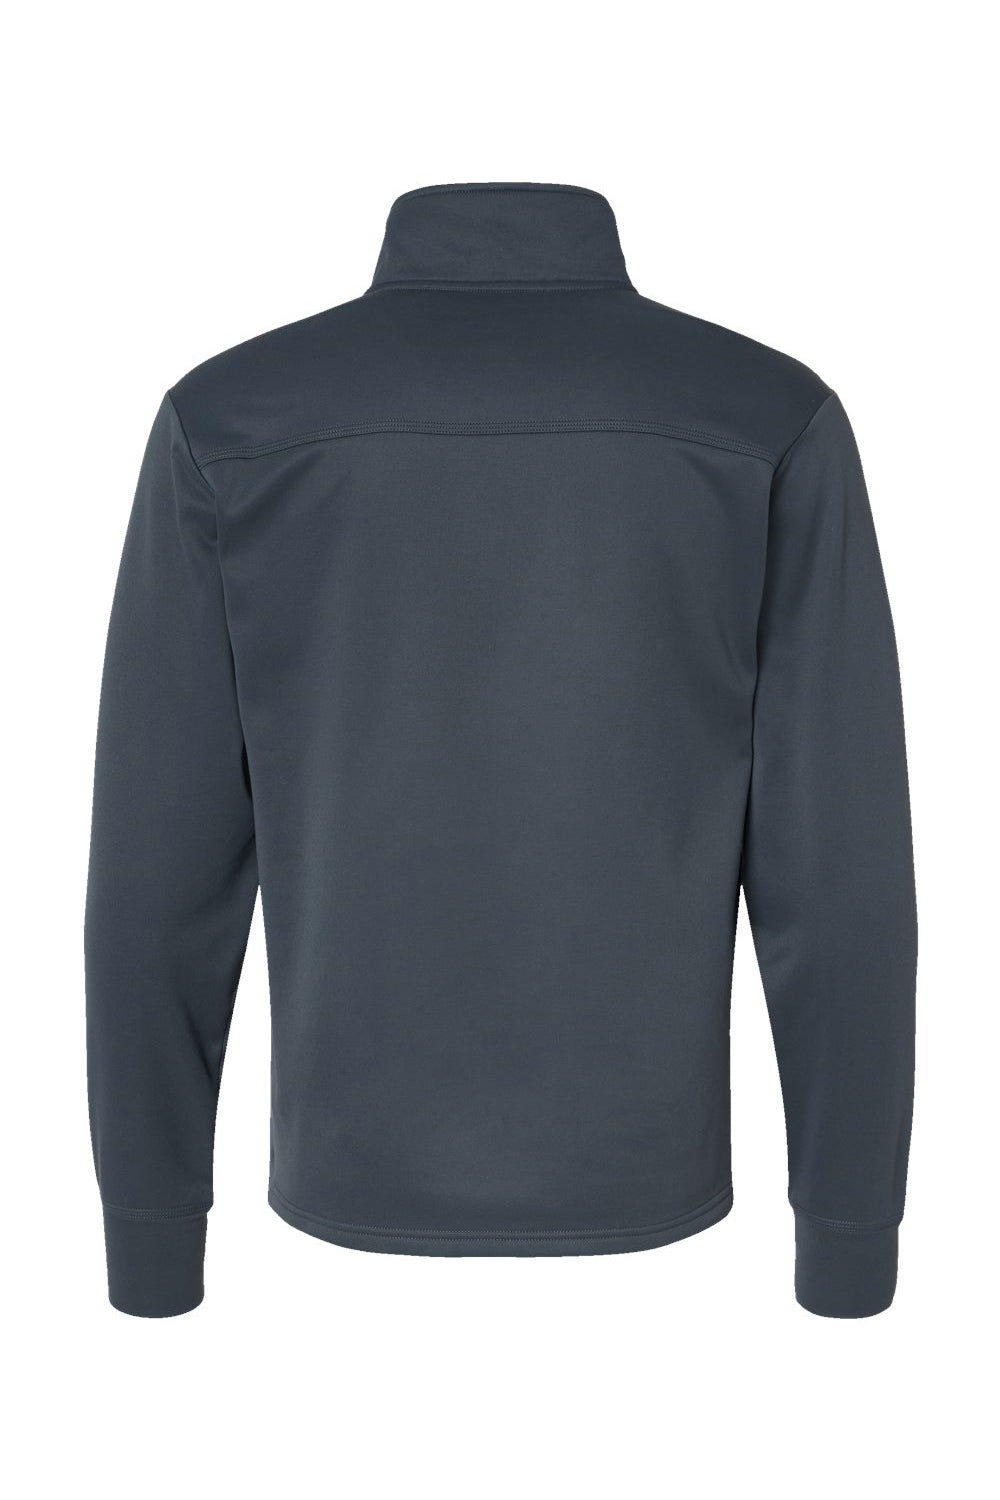 Champion CHP190 Mens Sport 1/4 Zip Pullover Stealth Grey Flat Back